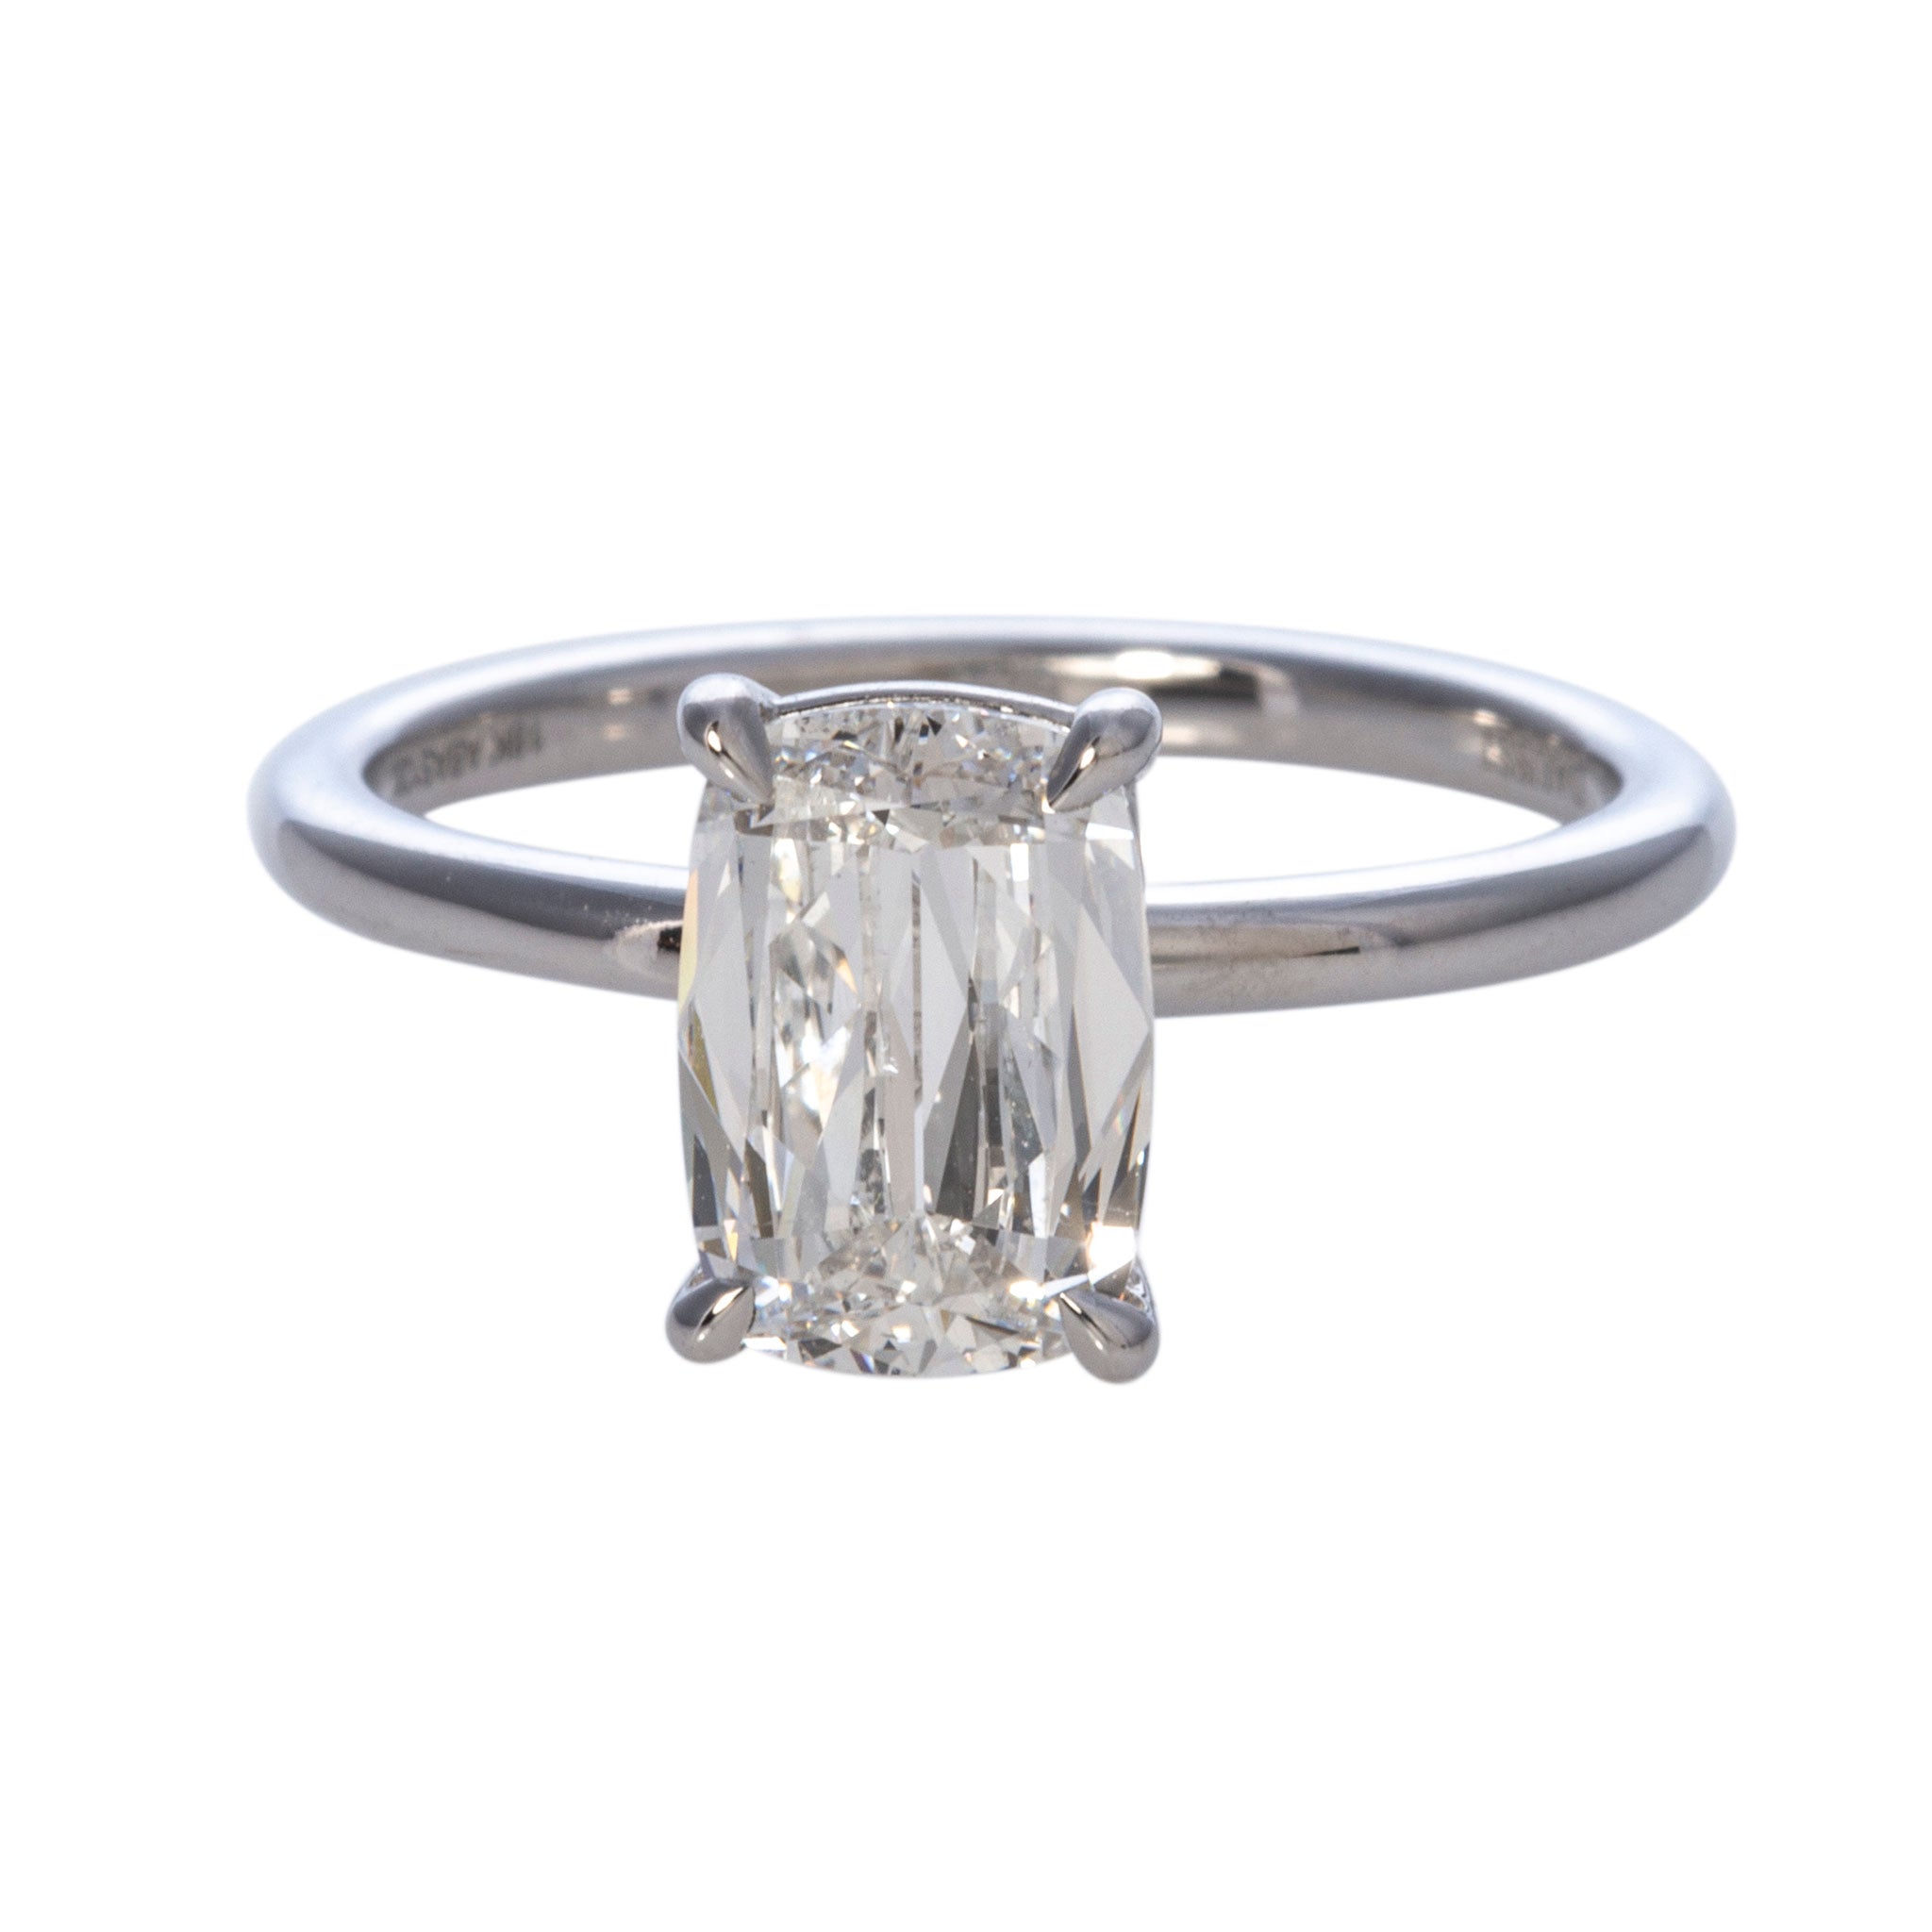 1.5ct Cushion Diamond Solitaire 18K White Gold Engagement Ring